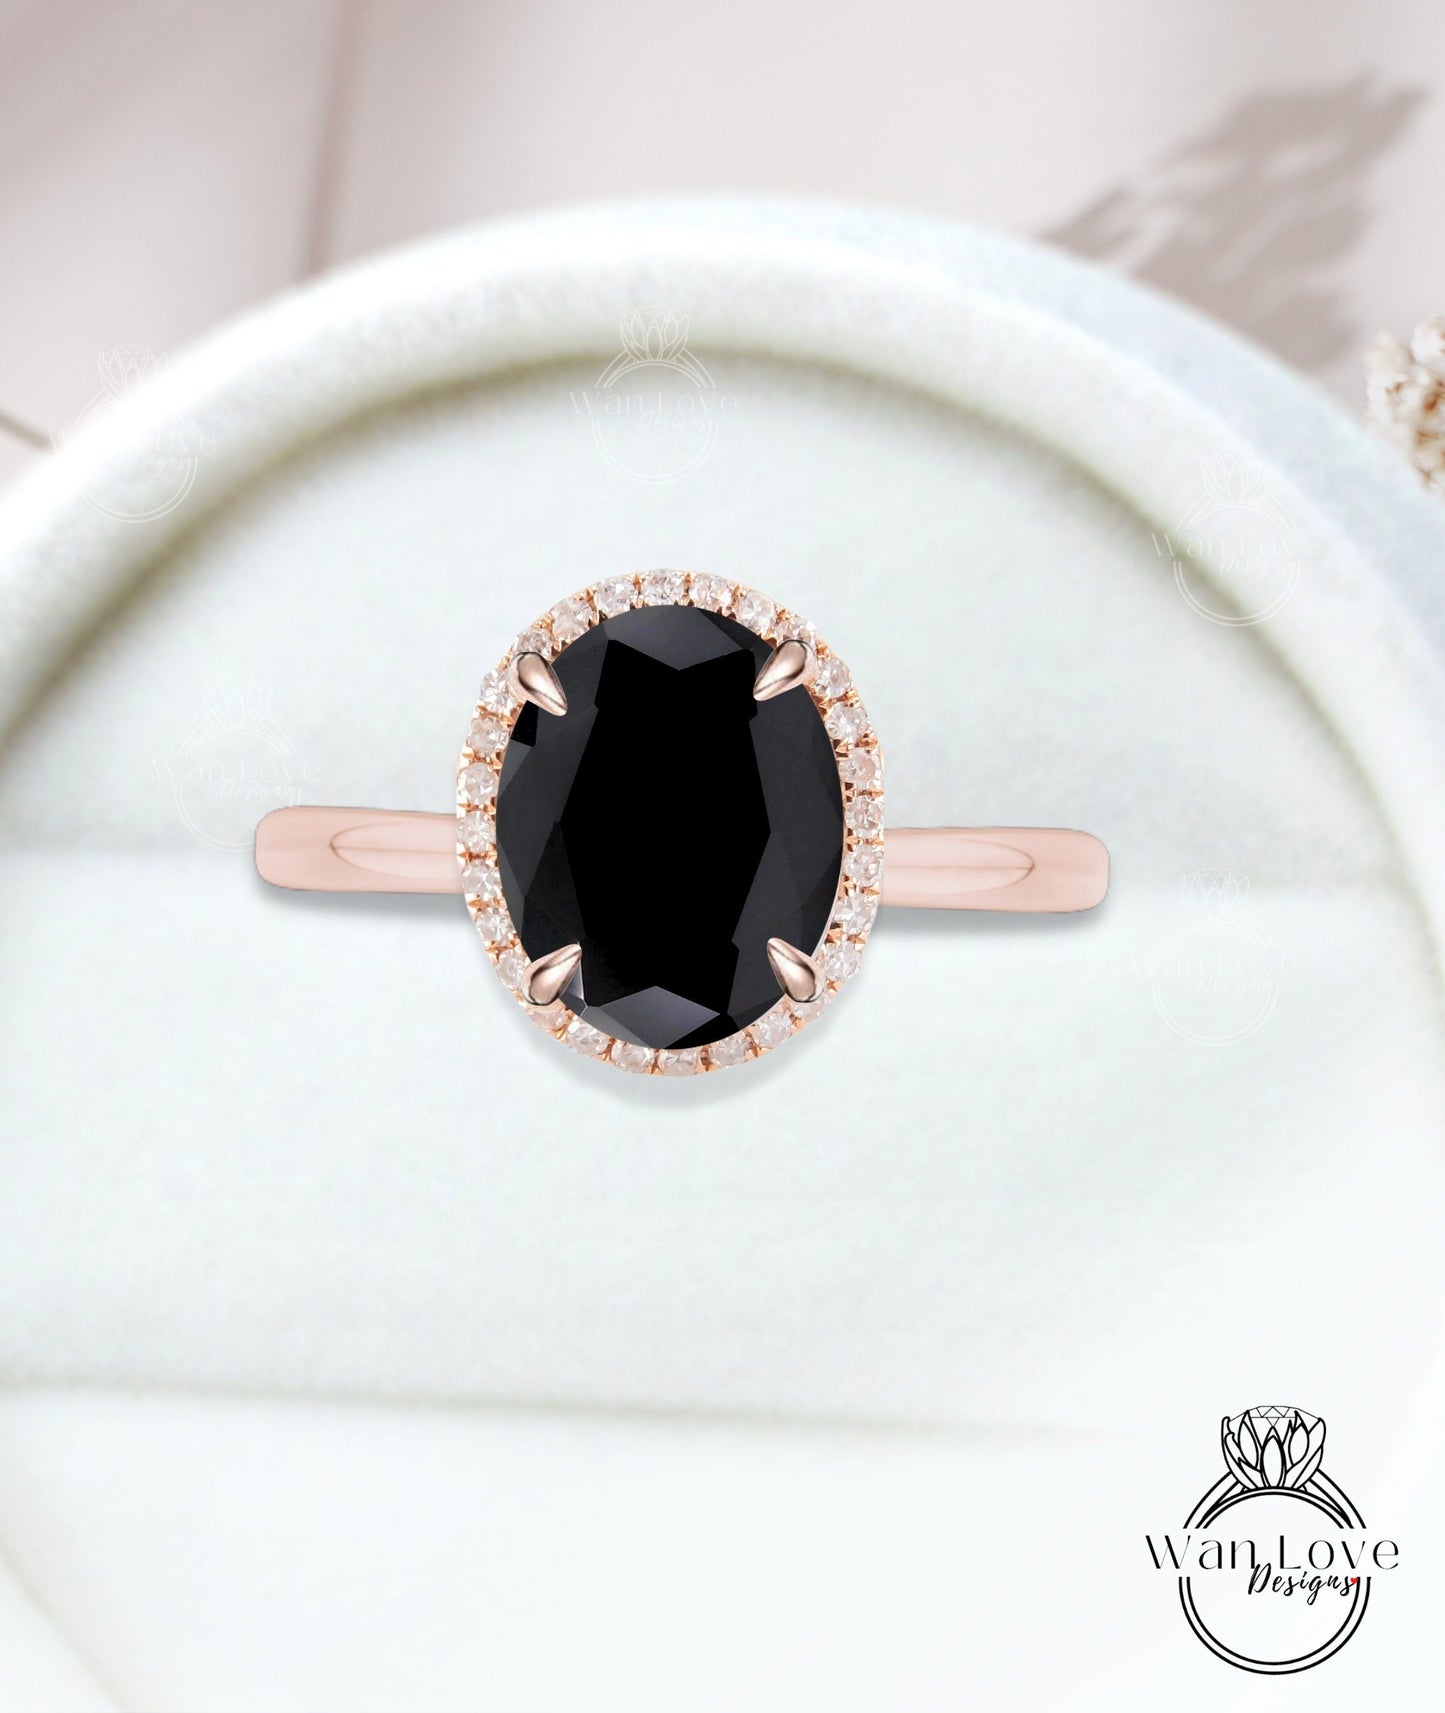 Oval cut Black Spinel engagement ring rose gold halo ring diamond halo tapered plain thin dainty band art deco anniversary promise ring Wan Love Designs